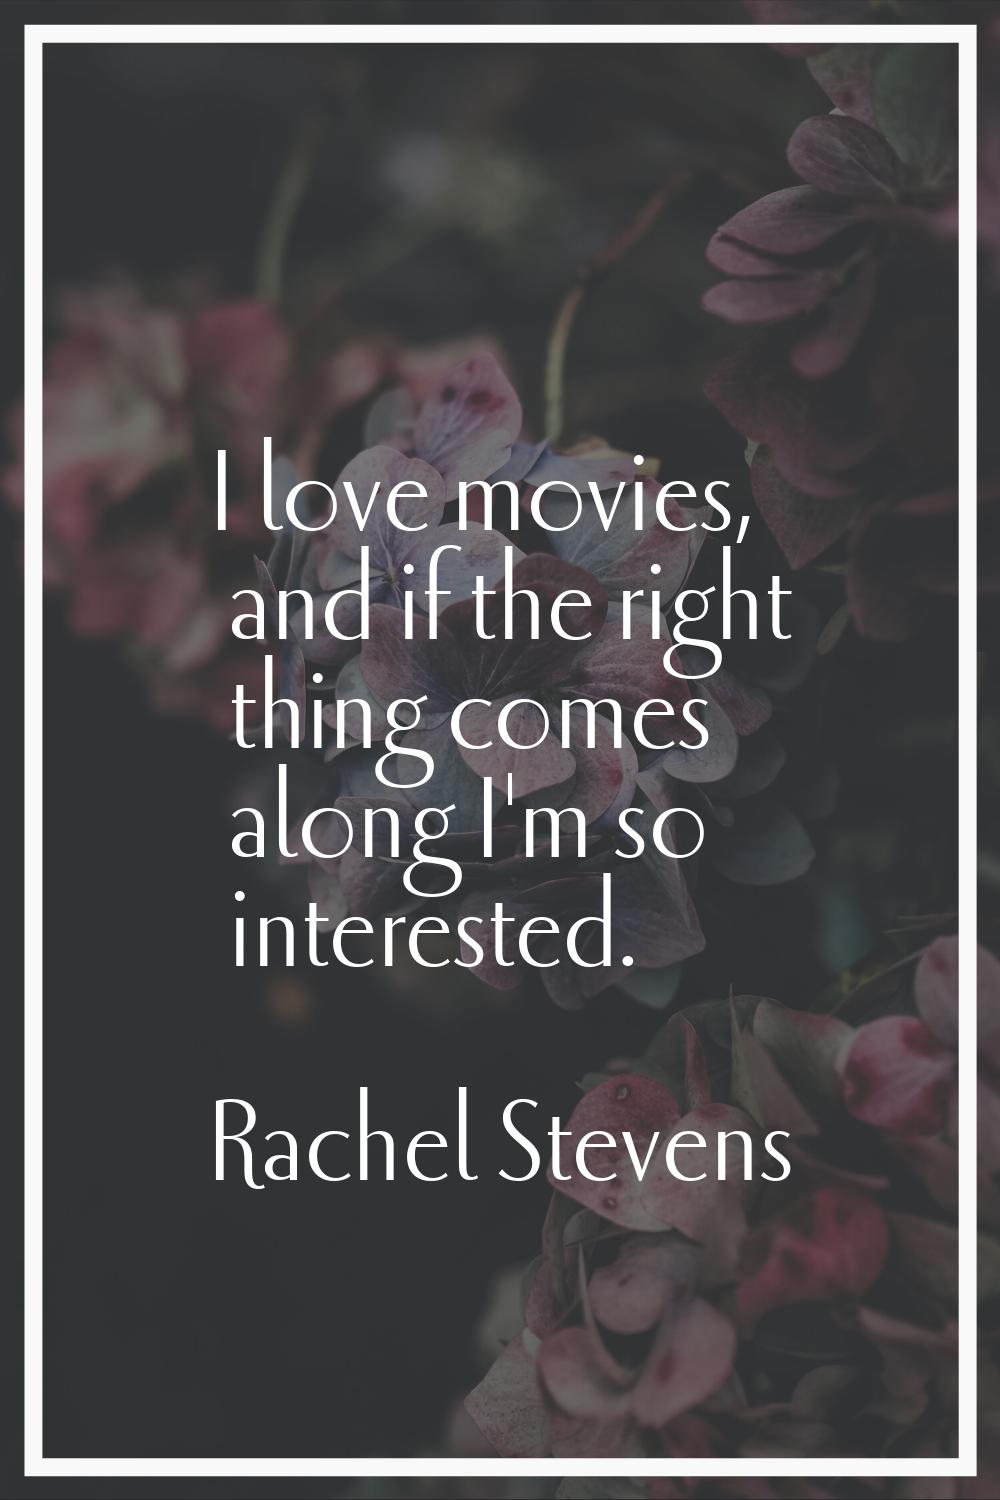 I love movies, and if the right thing comes along I'm so interested.